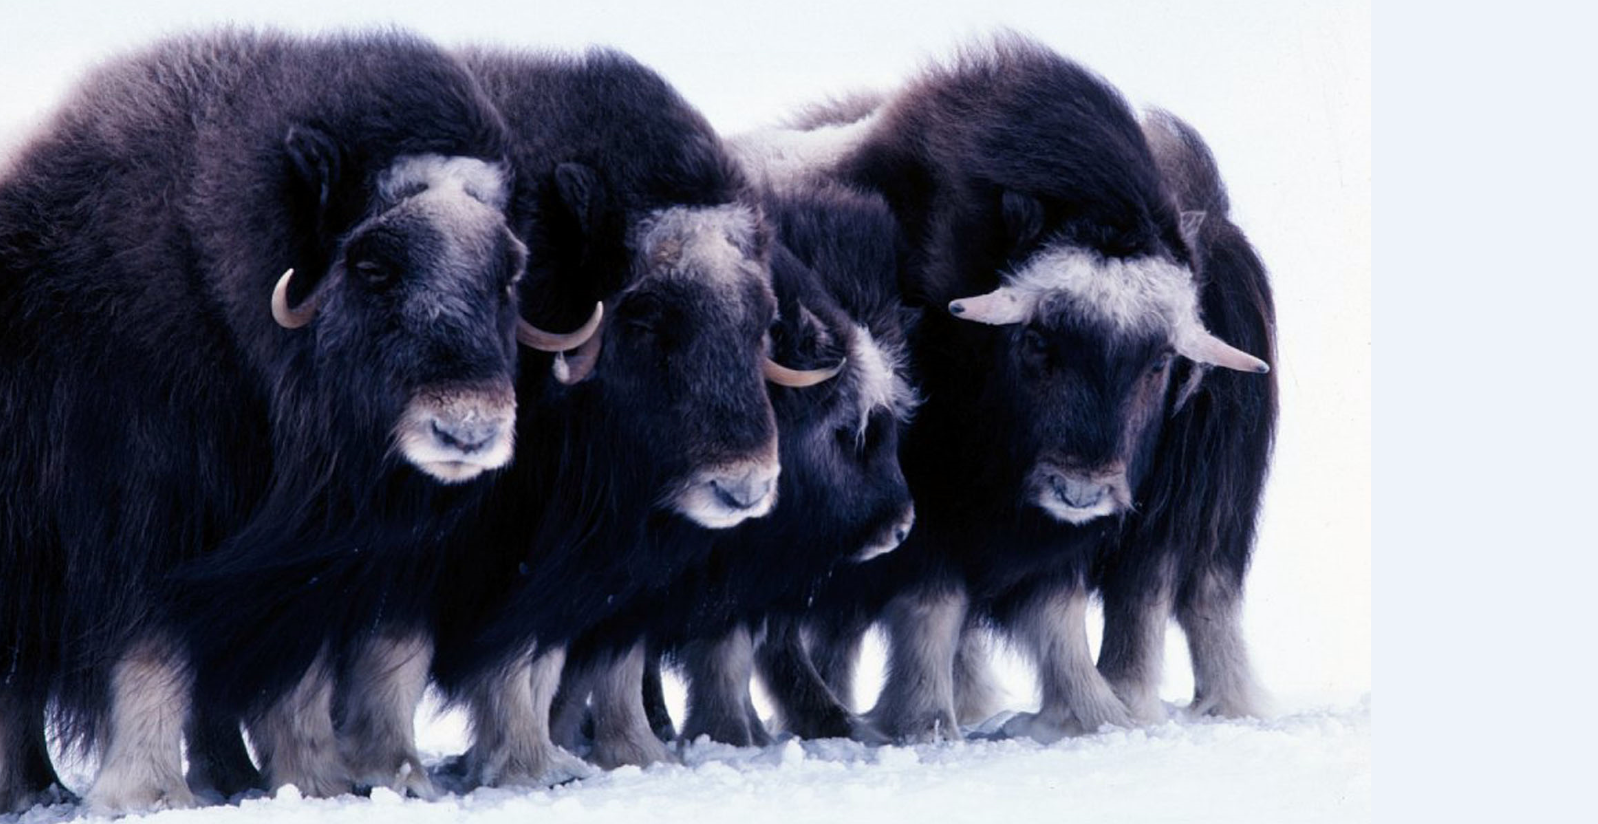 This week, the Alaska Department of Fish and Game issued an order allowing the harvest of muskox stranded on icefloes off western Alaska. (US Fish and Wildlife Service/Getty Images)